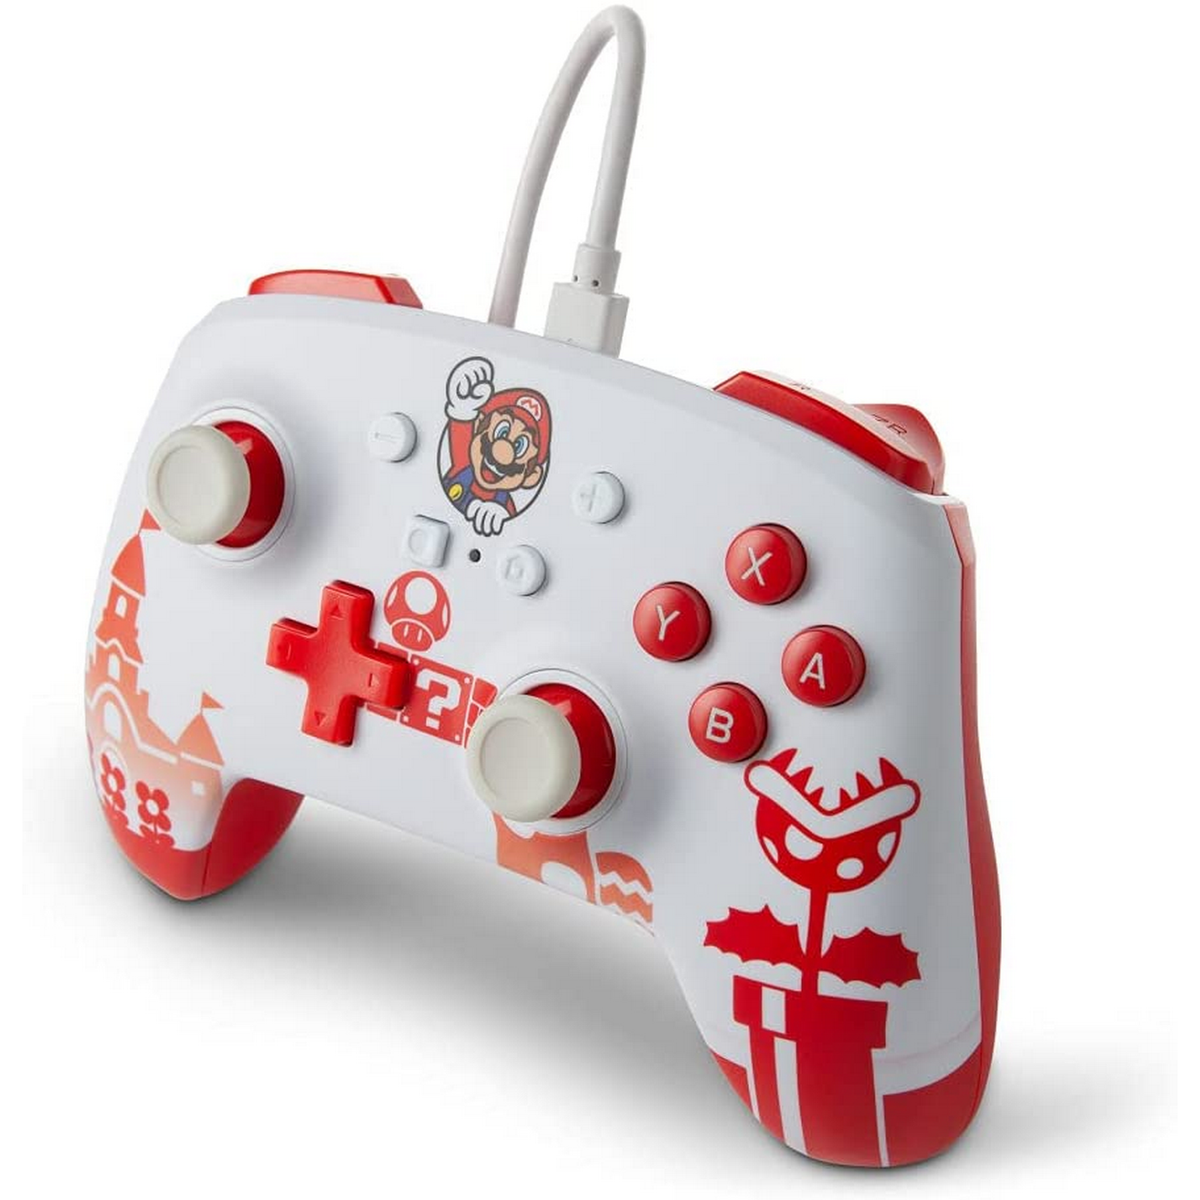 PA1519186-01NSW MARIO A Controller CONTR WIRED RED/WHITE POWER Rot/Weiß